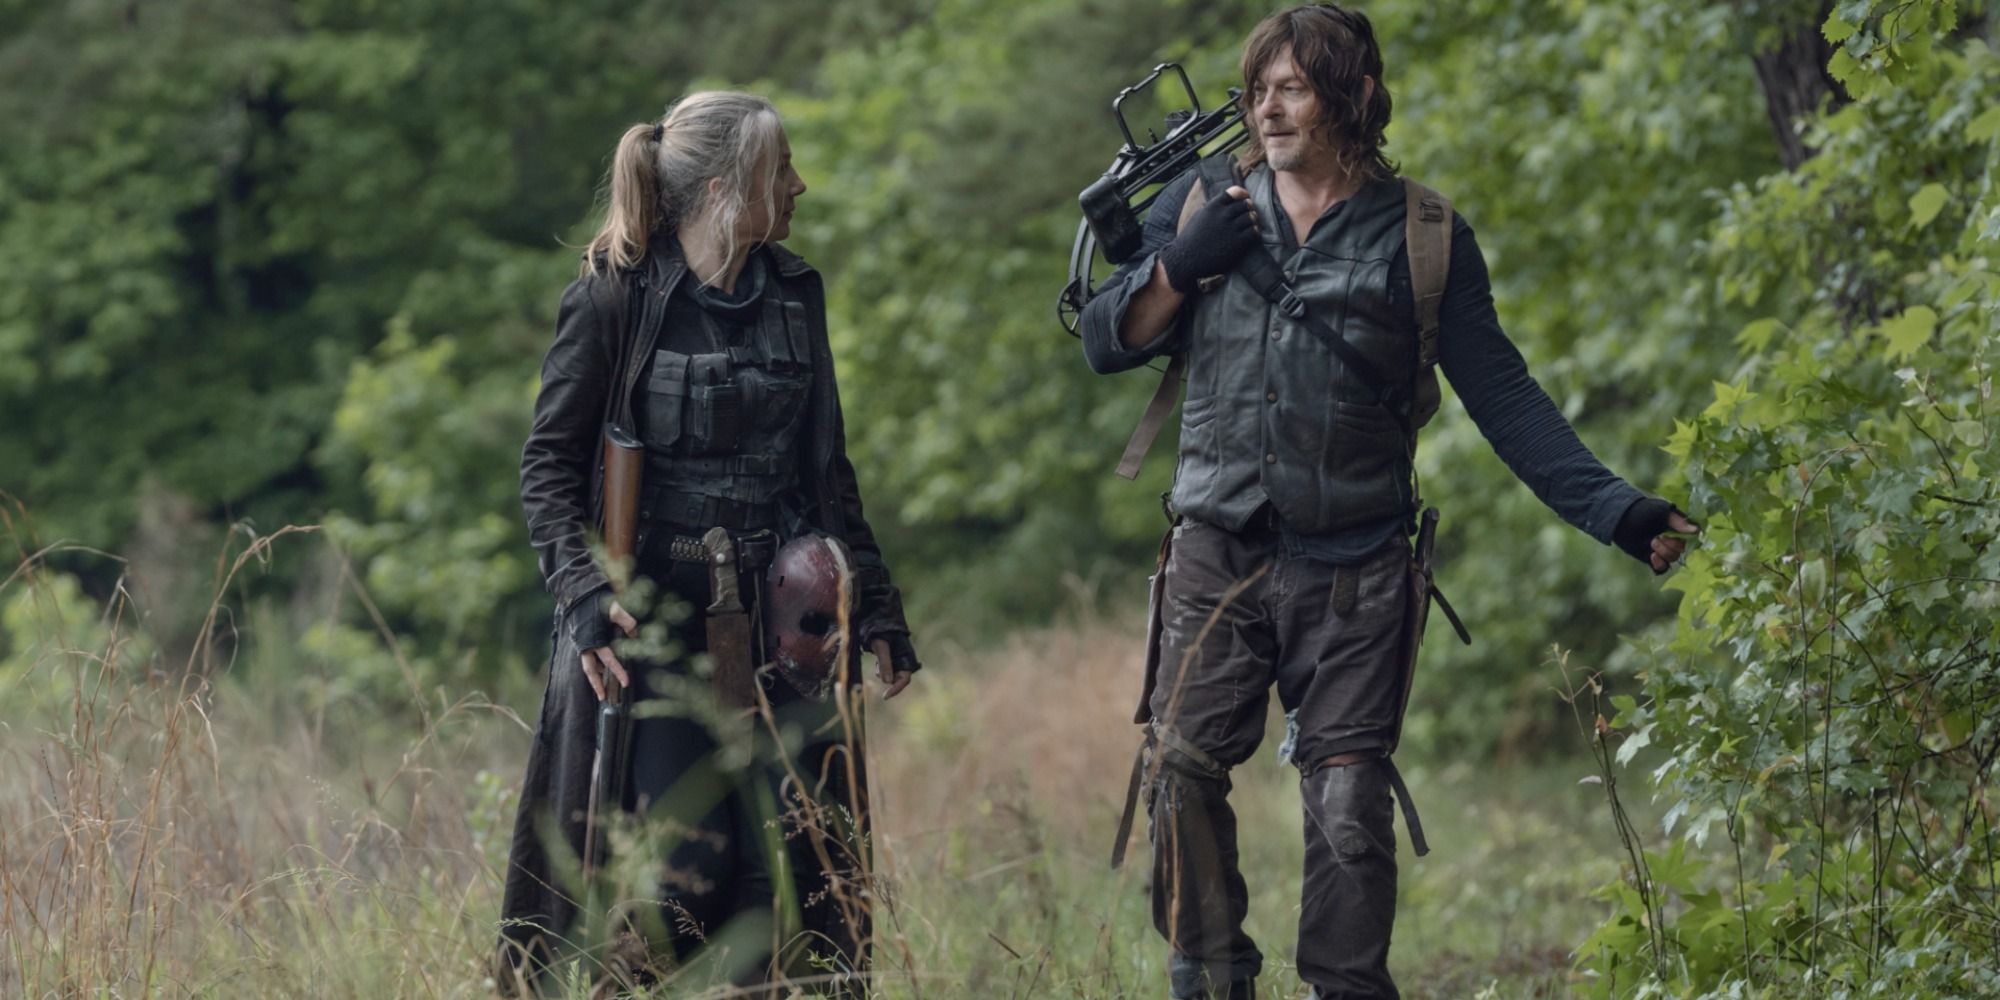 Daryl Dixon and Leah walk through the shrubbery together in 'The Walking Dead'